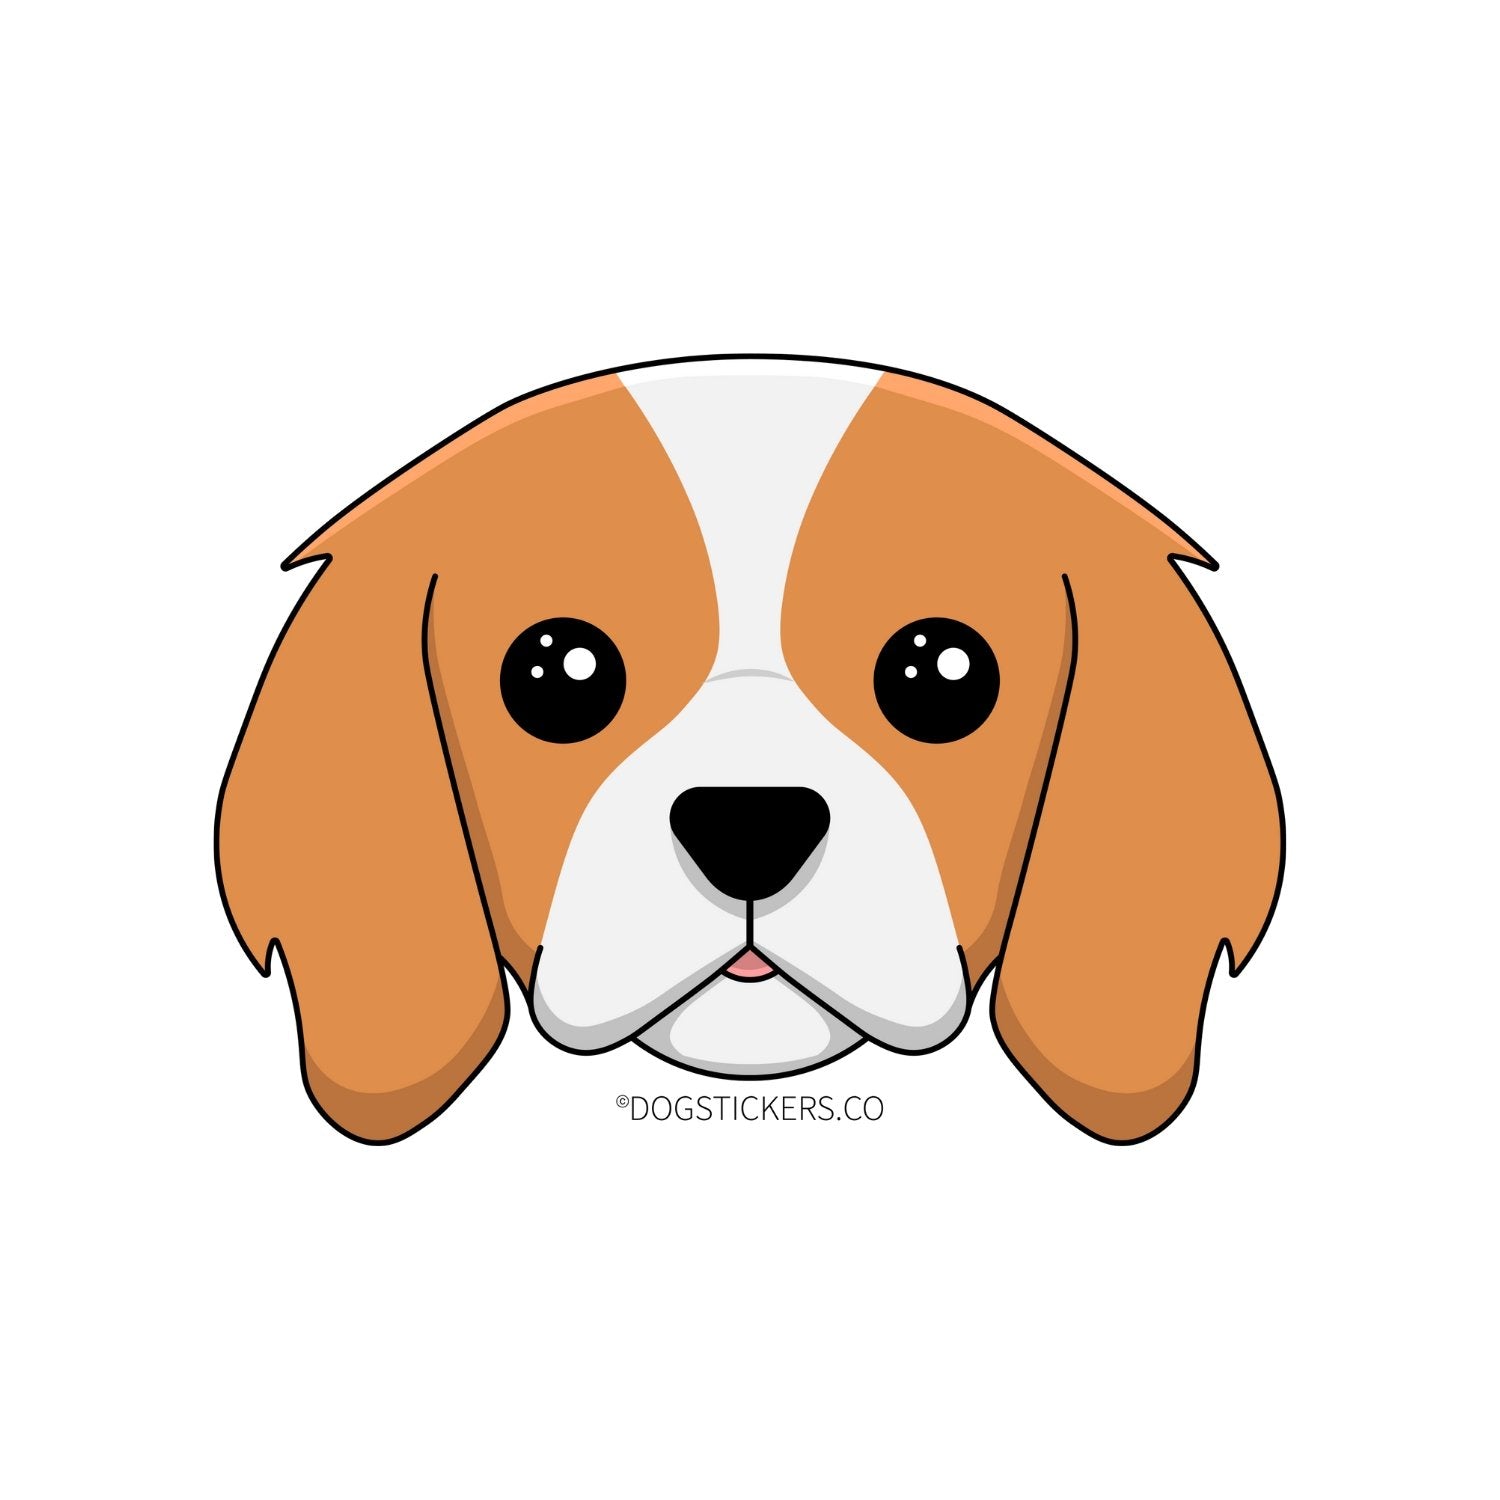 Cavalier King Charles Spaniel Sticker - Dogstickers.co